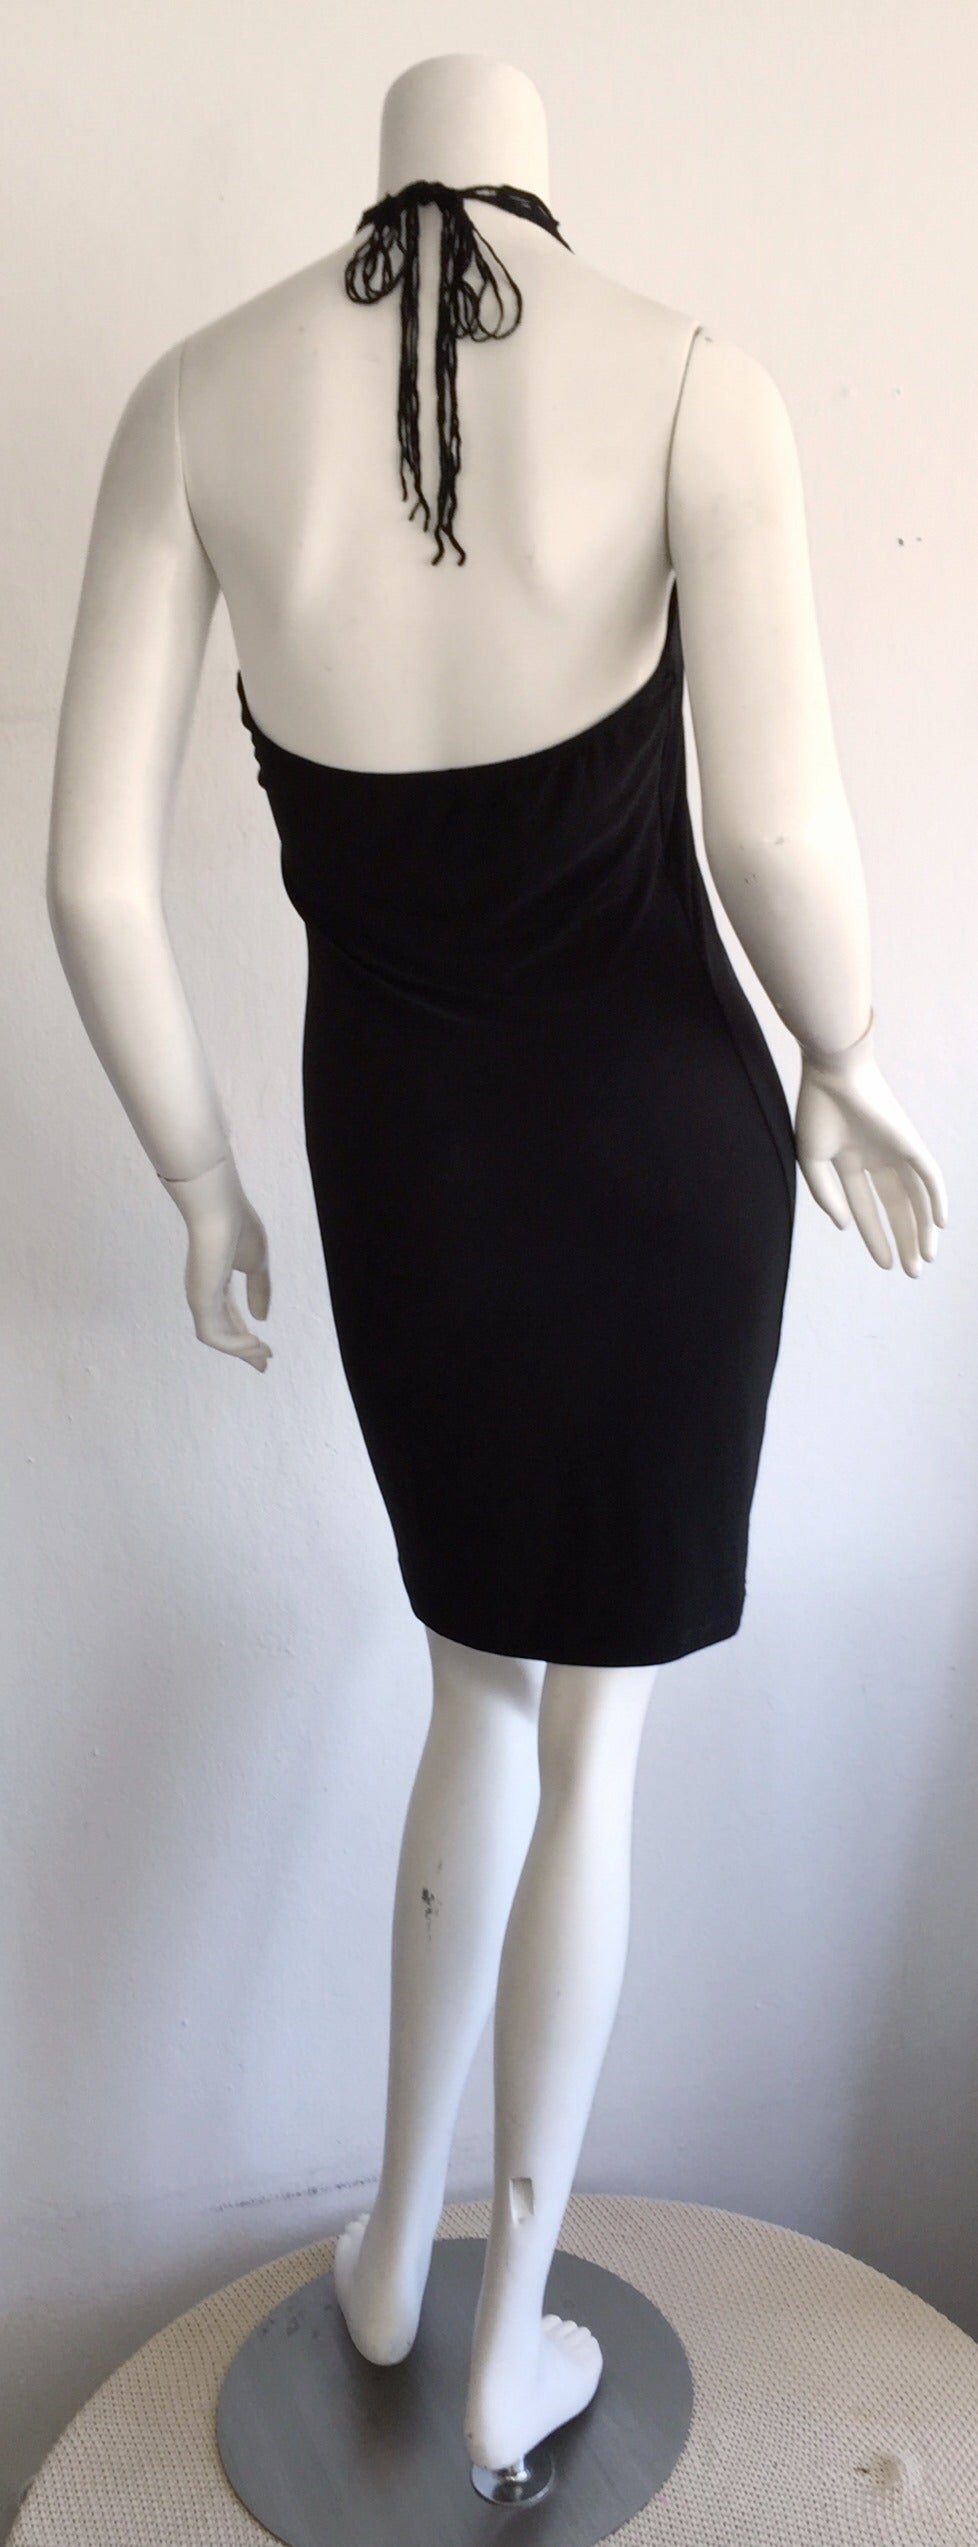 1990s Vintage Gianni Versace Bodycon Black Cut - Out Crochet Bondage Dress In Excellent Condition For Sale In San Diego, CA